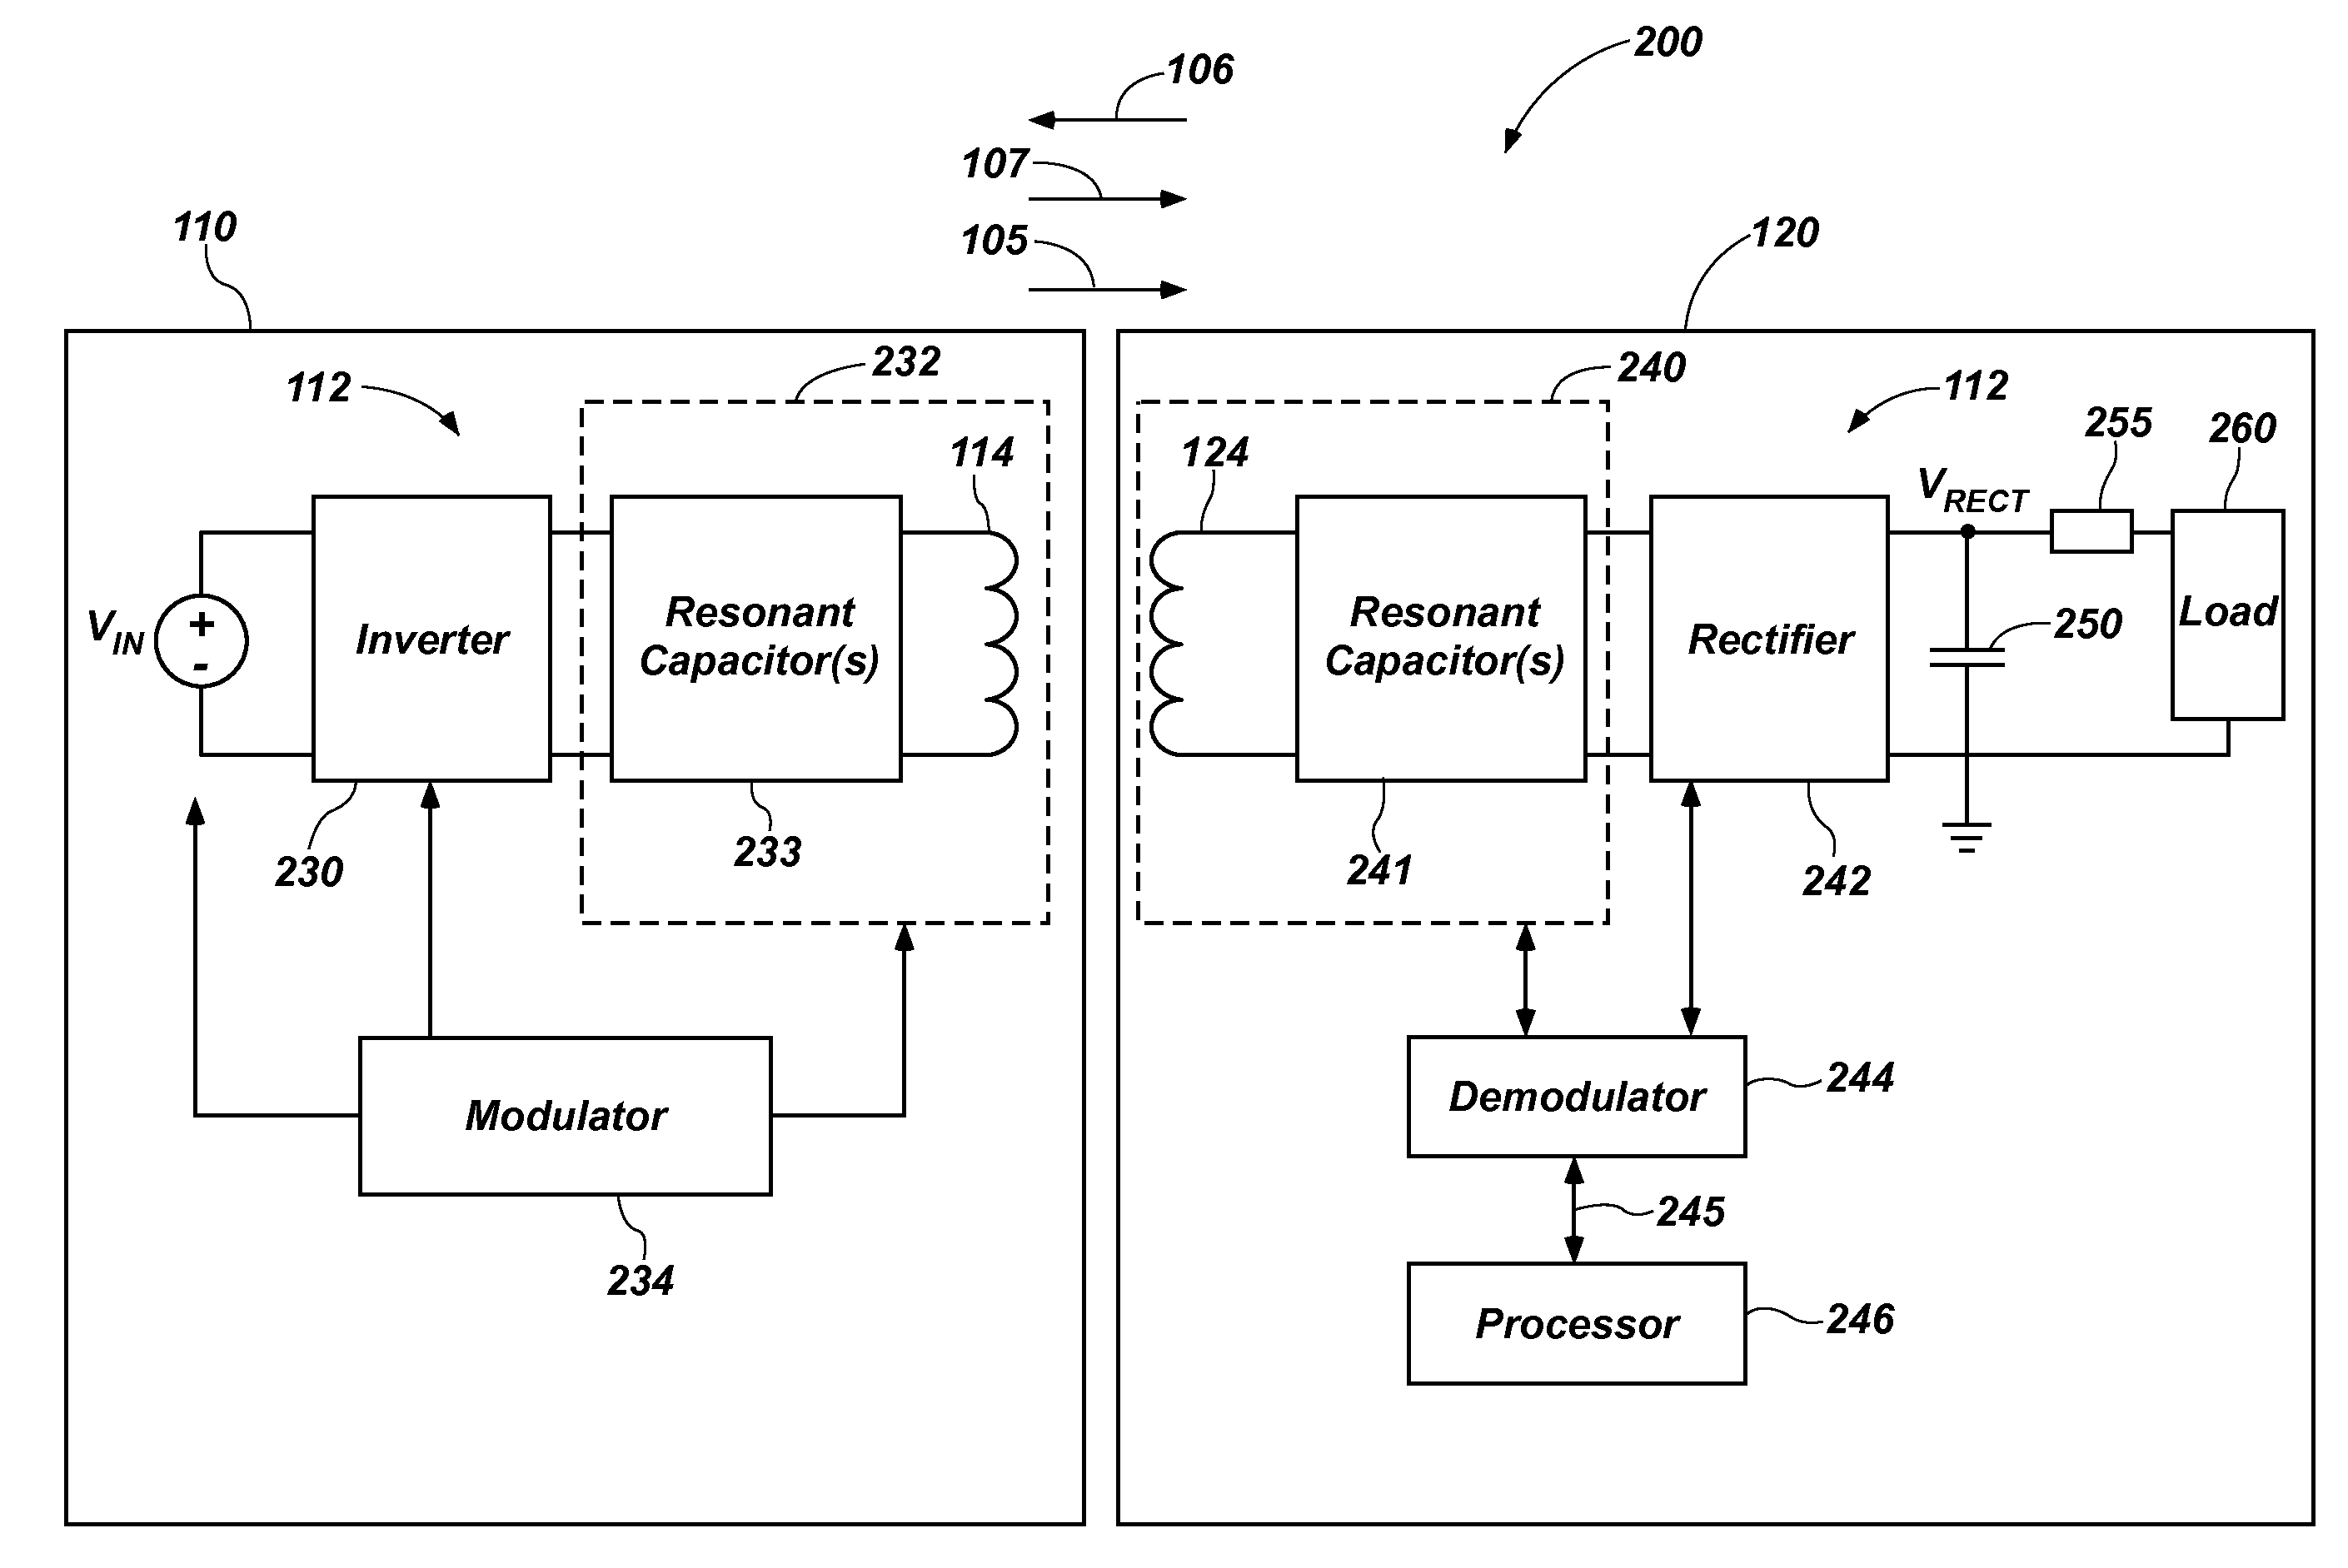 Apparatus, system, and method for back-channel communication in an inductive wireless power transfer system